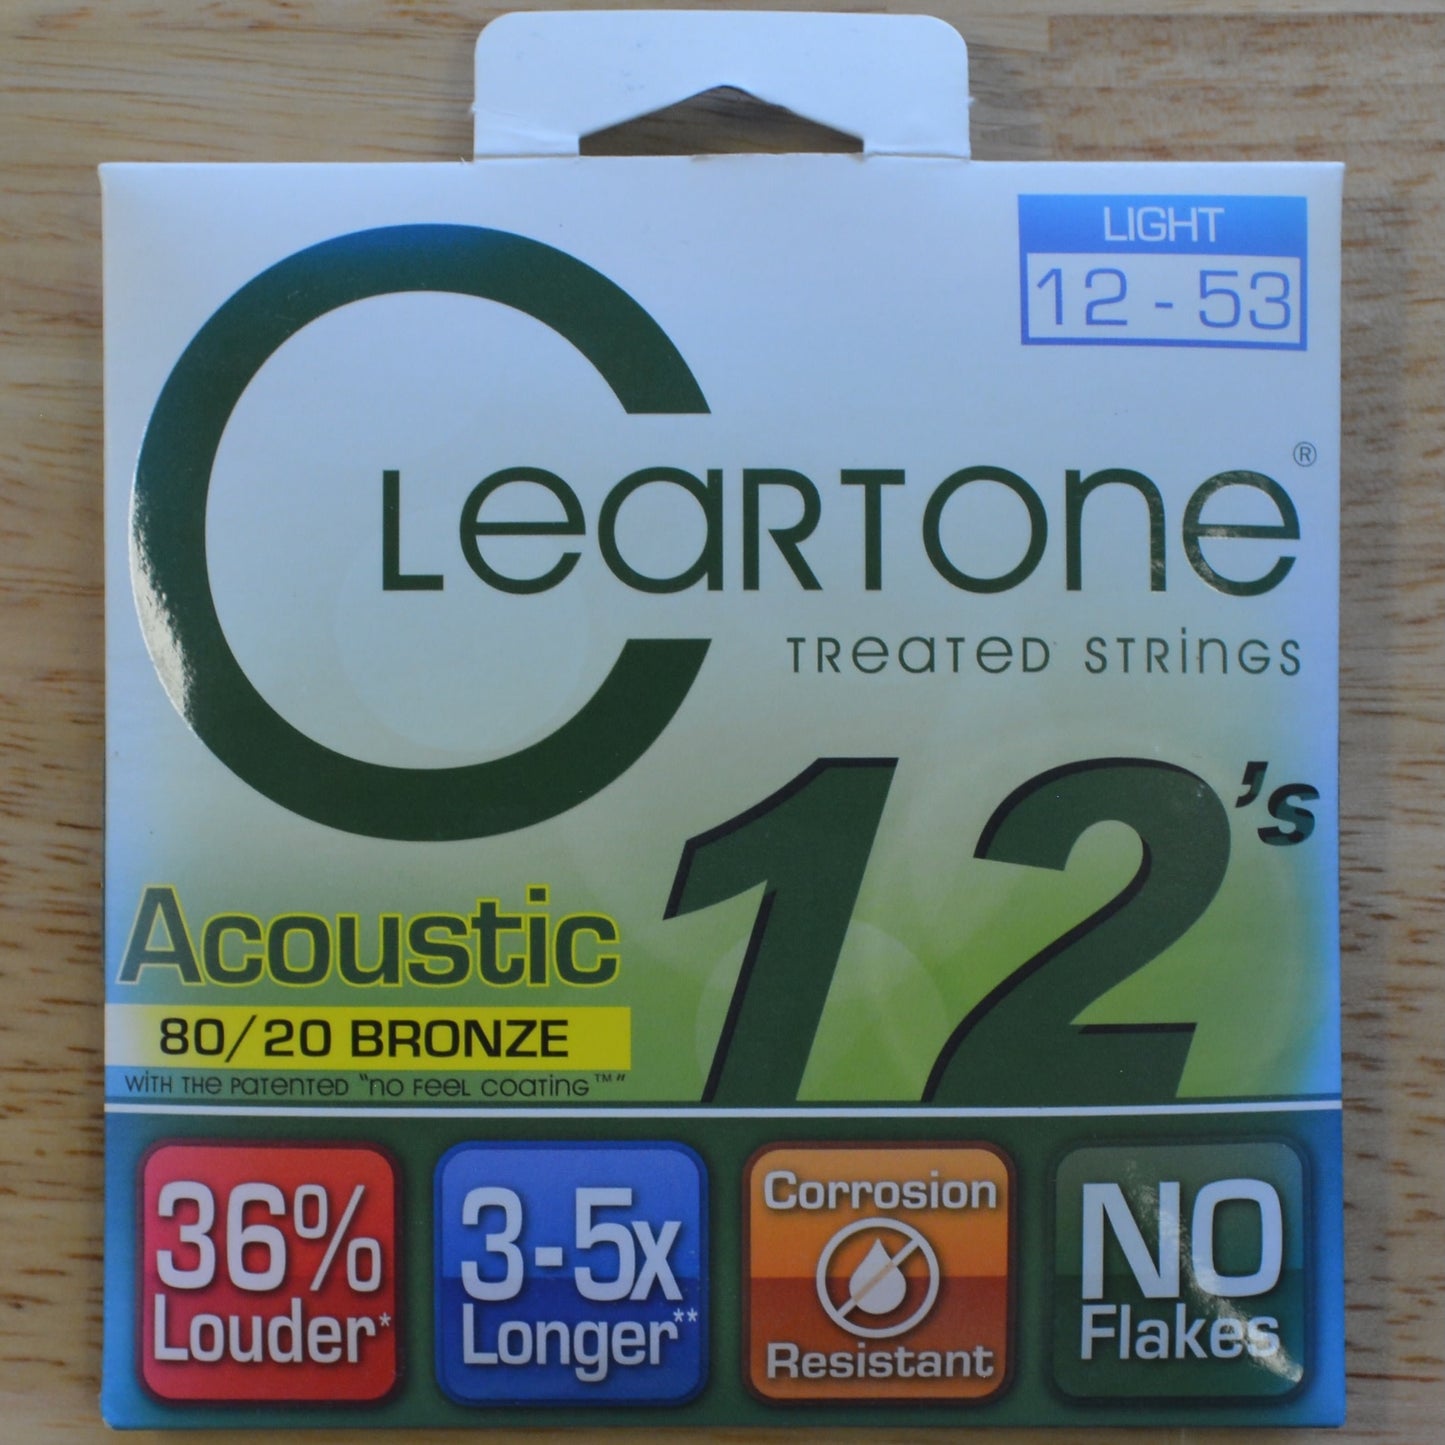 Cleartone Treated Acoustic Strings 80/20 Bronze Light